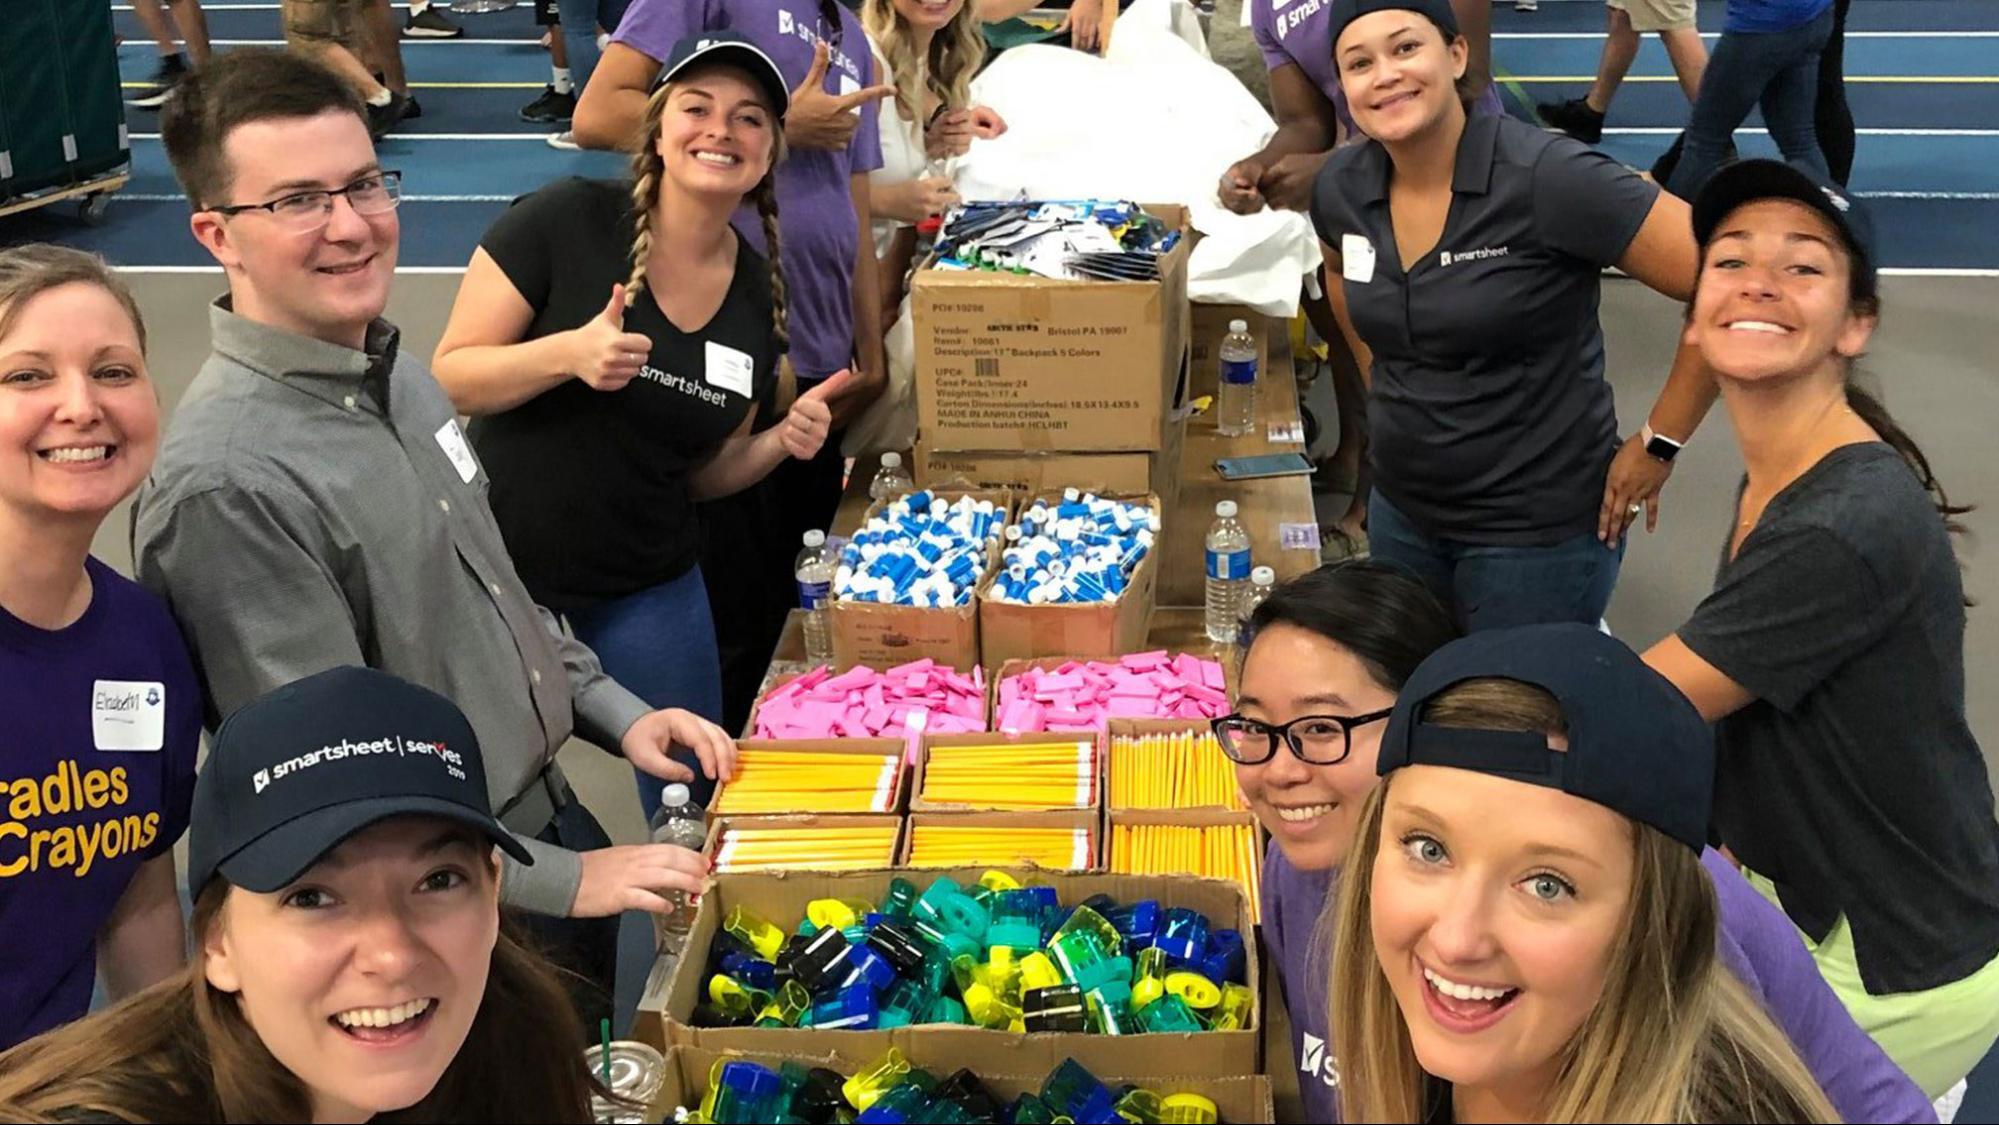 smartsheet employees packing boxes of school supplies